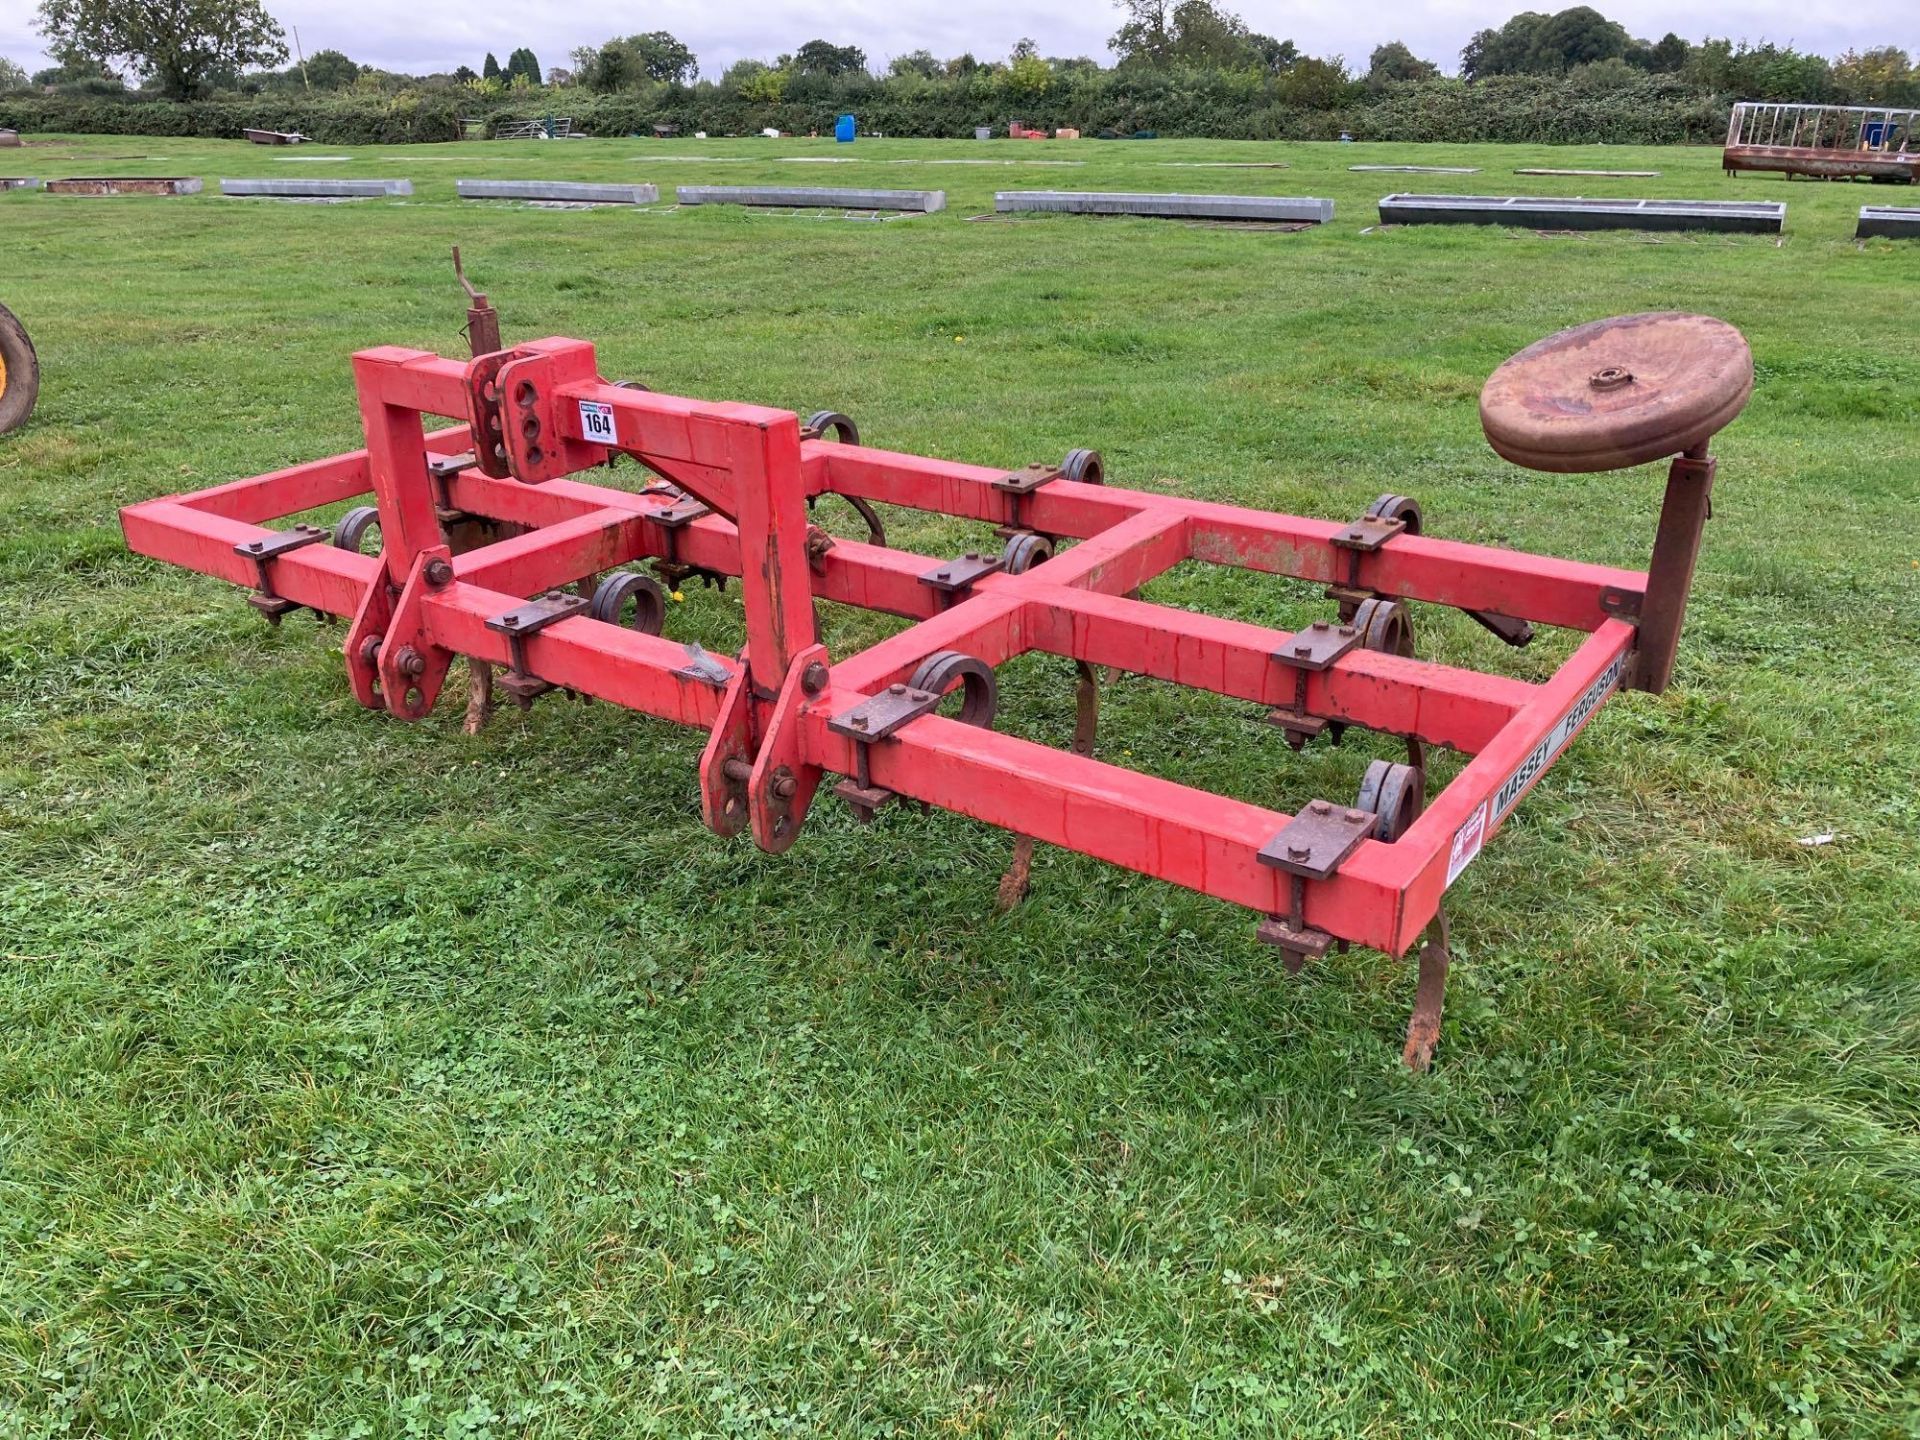 Massey Ferguson 8ft pig tail cultivator with depth wheels. Serial No: W105